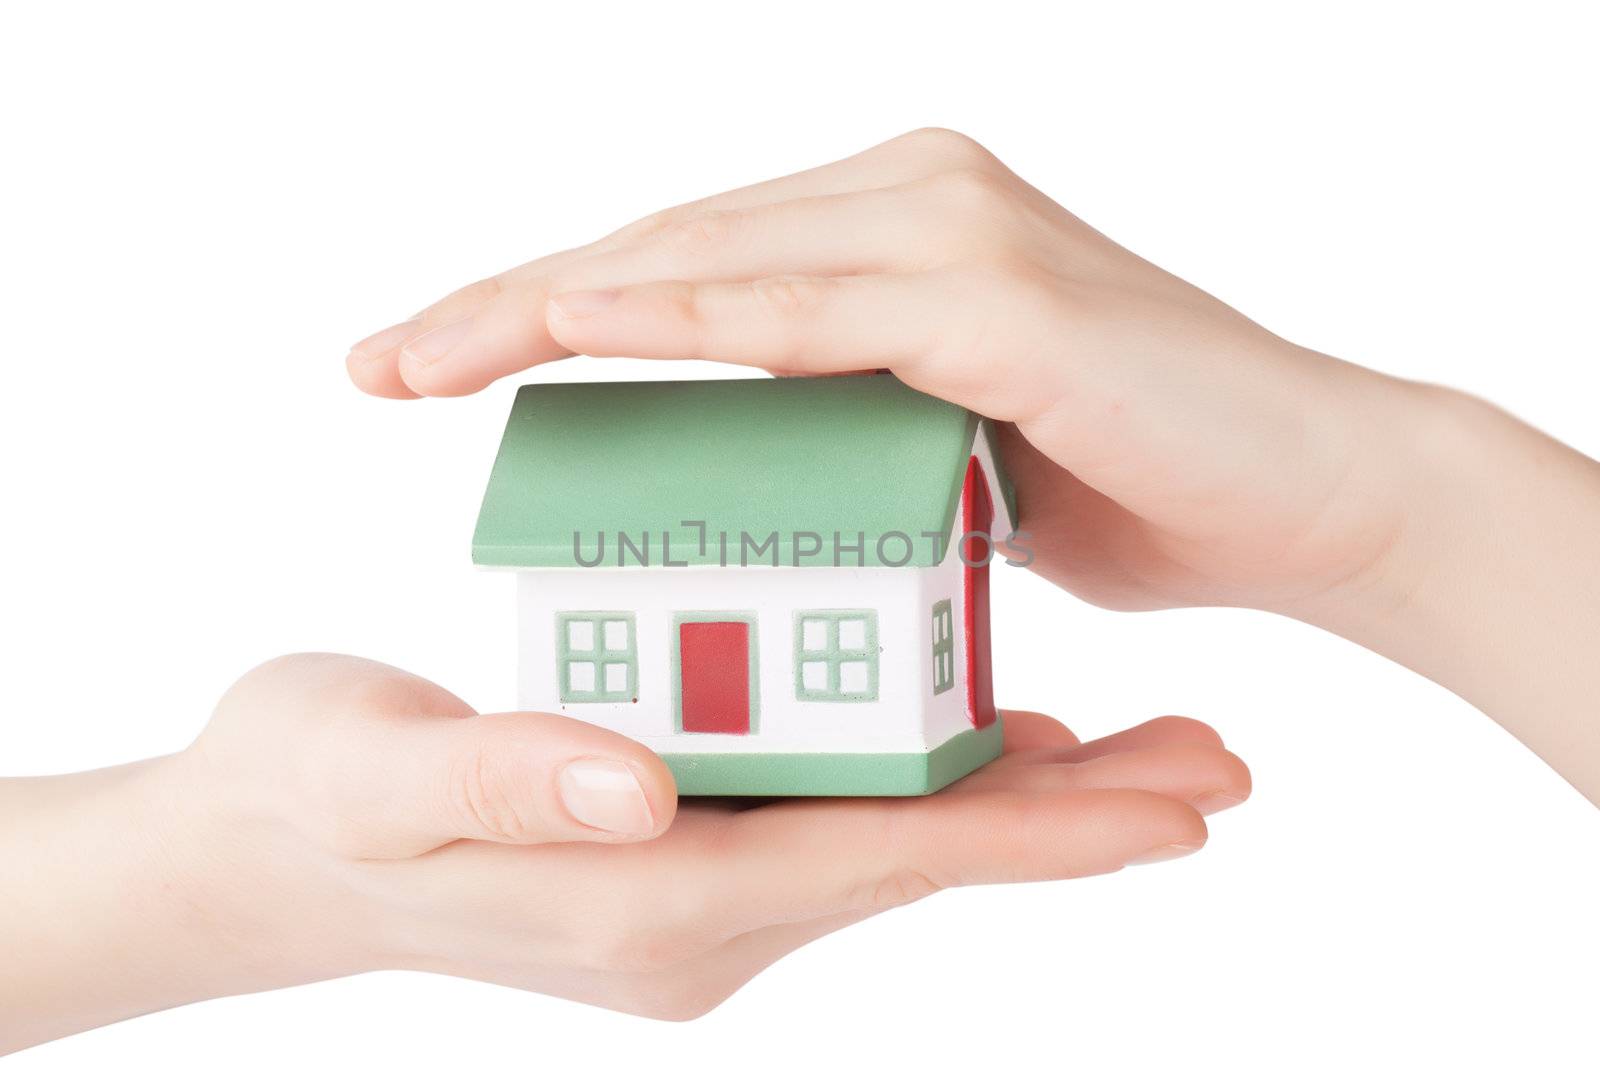 Little house toy in hands isolated over white background